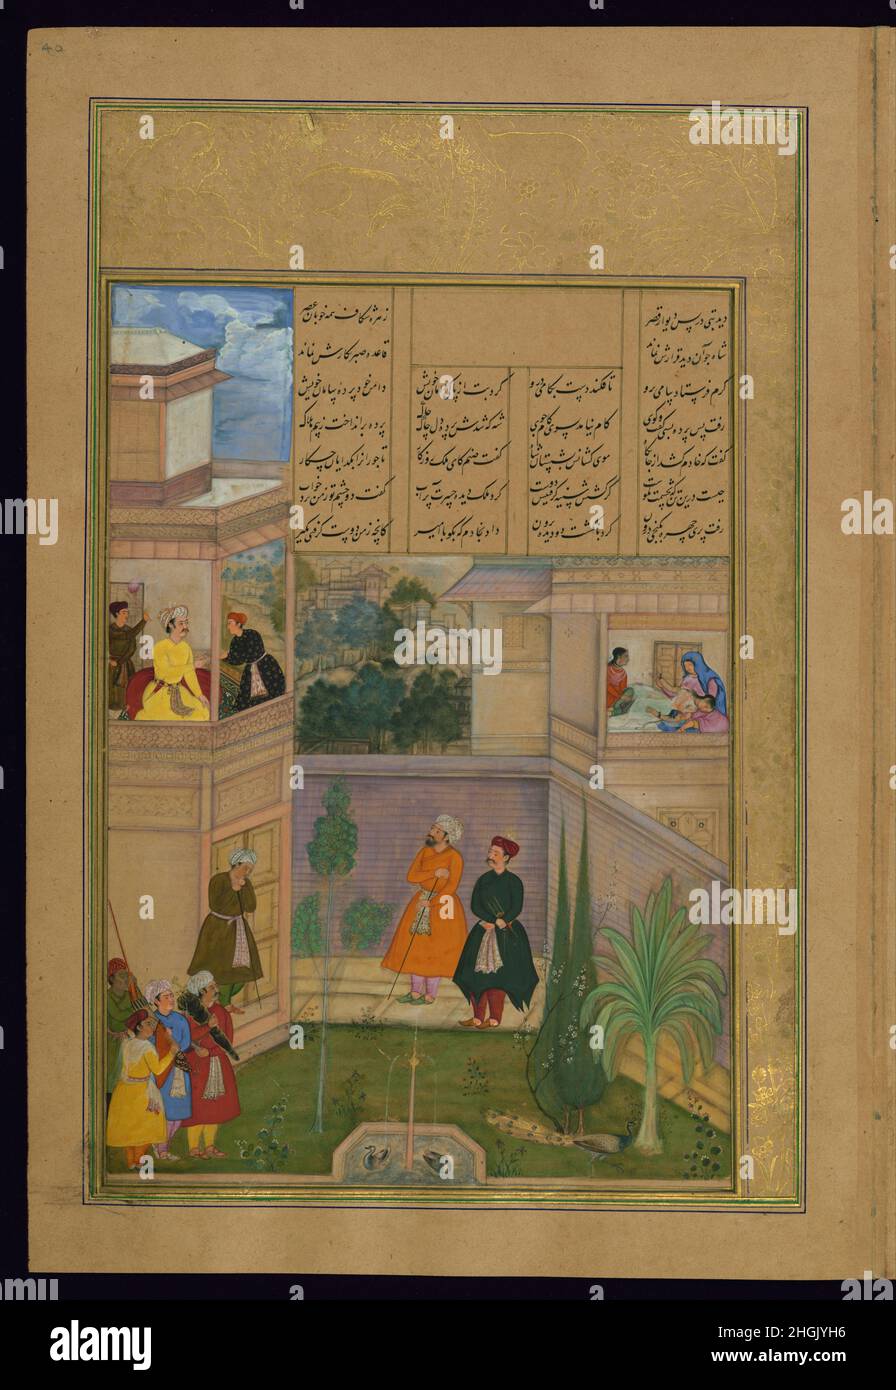 Amir Khusraw Dihlavi - A Virtuous Woman Placates the King by Plucking Out Her Eyes Stock Photo